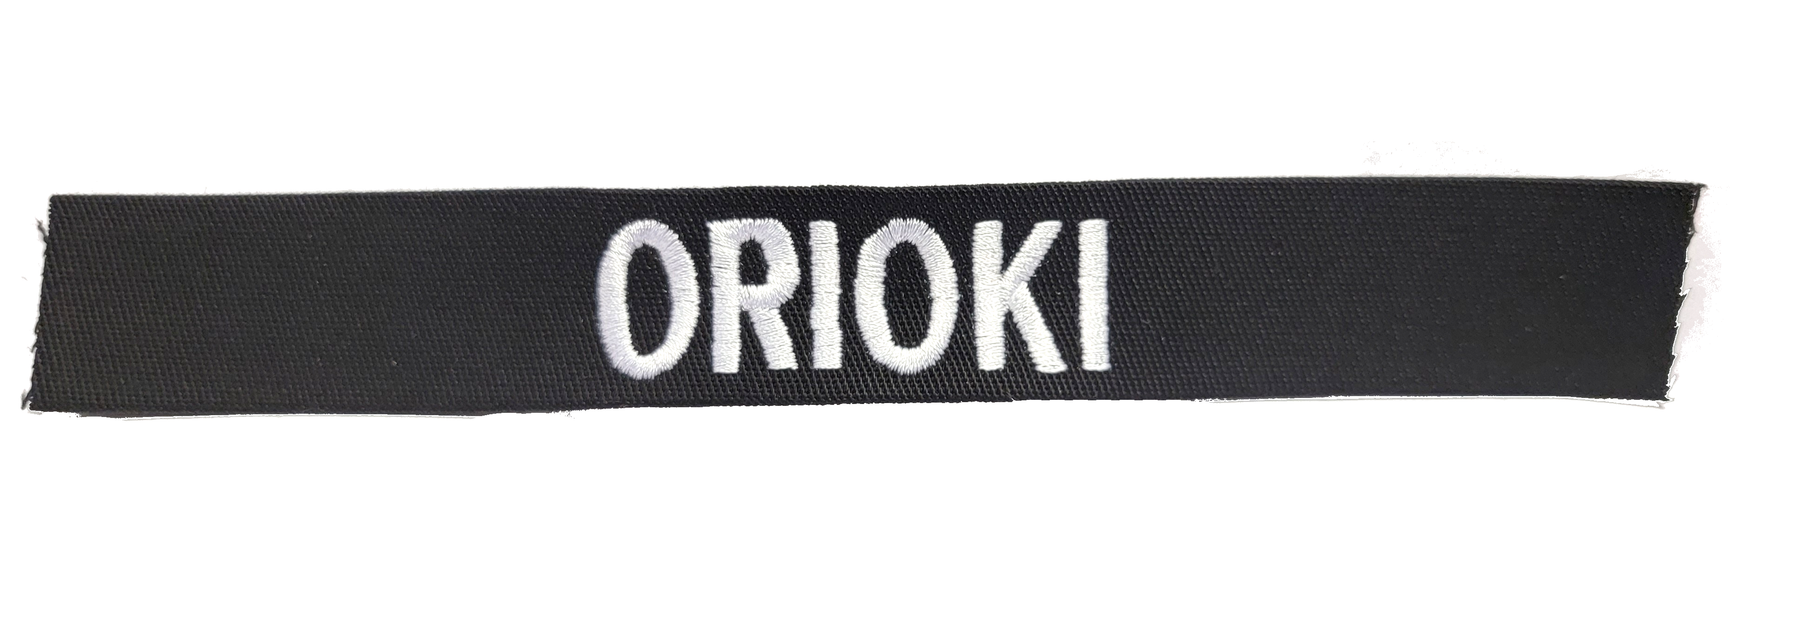 Black Name Tape - SEW ON - Fabric Material